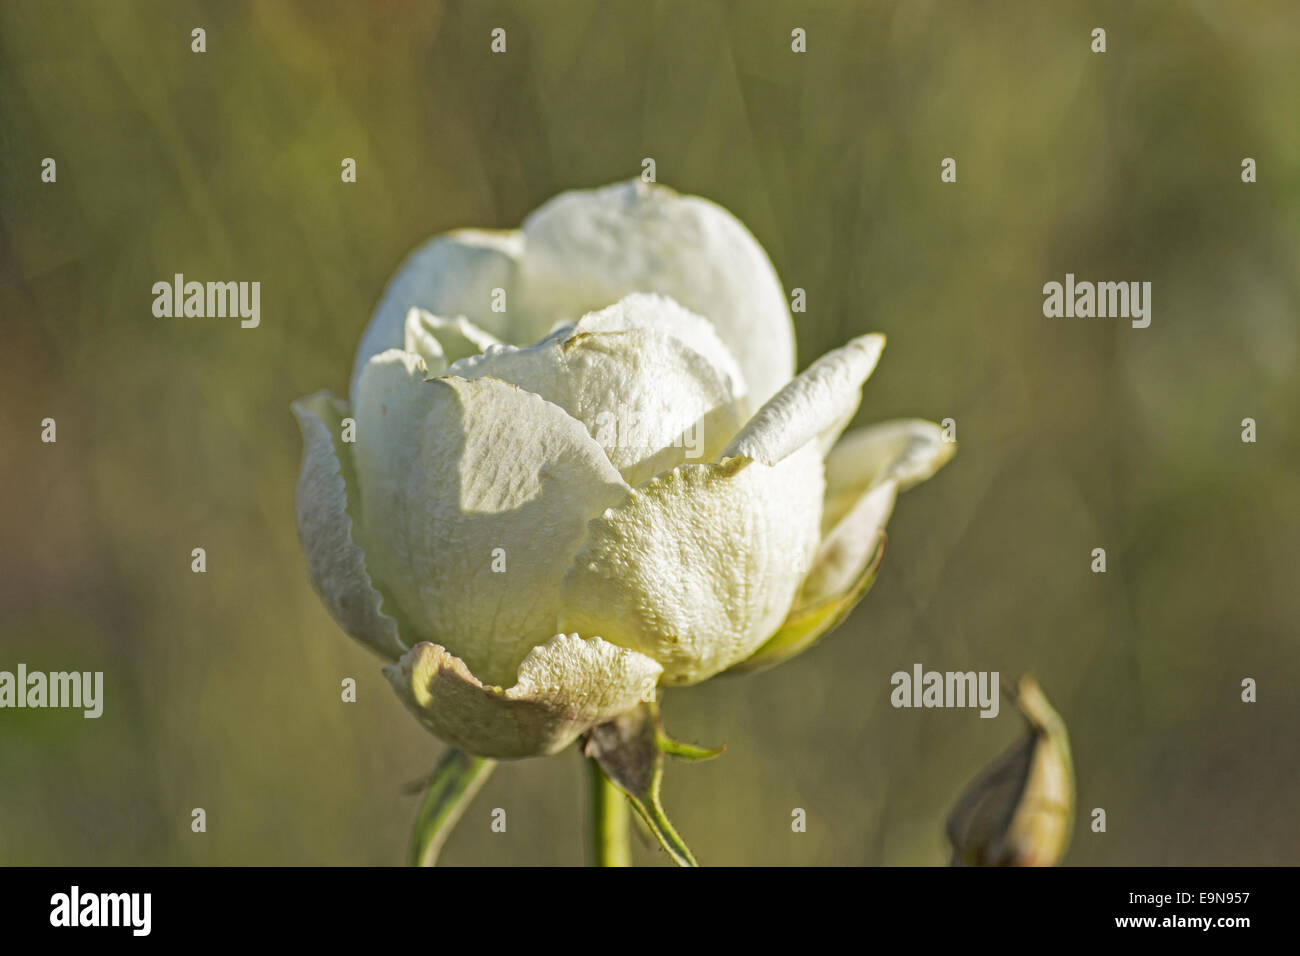 Blooming gardenrose in january - caducity Stock Photo